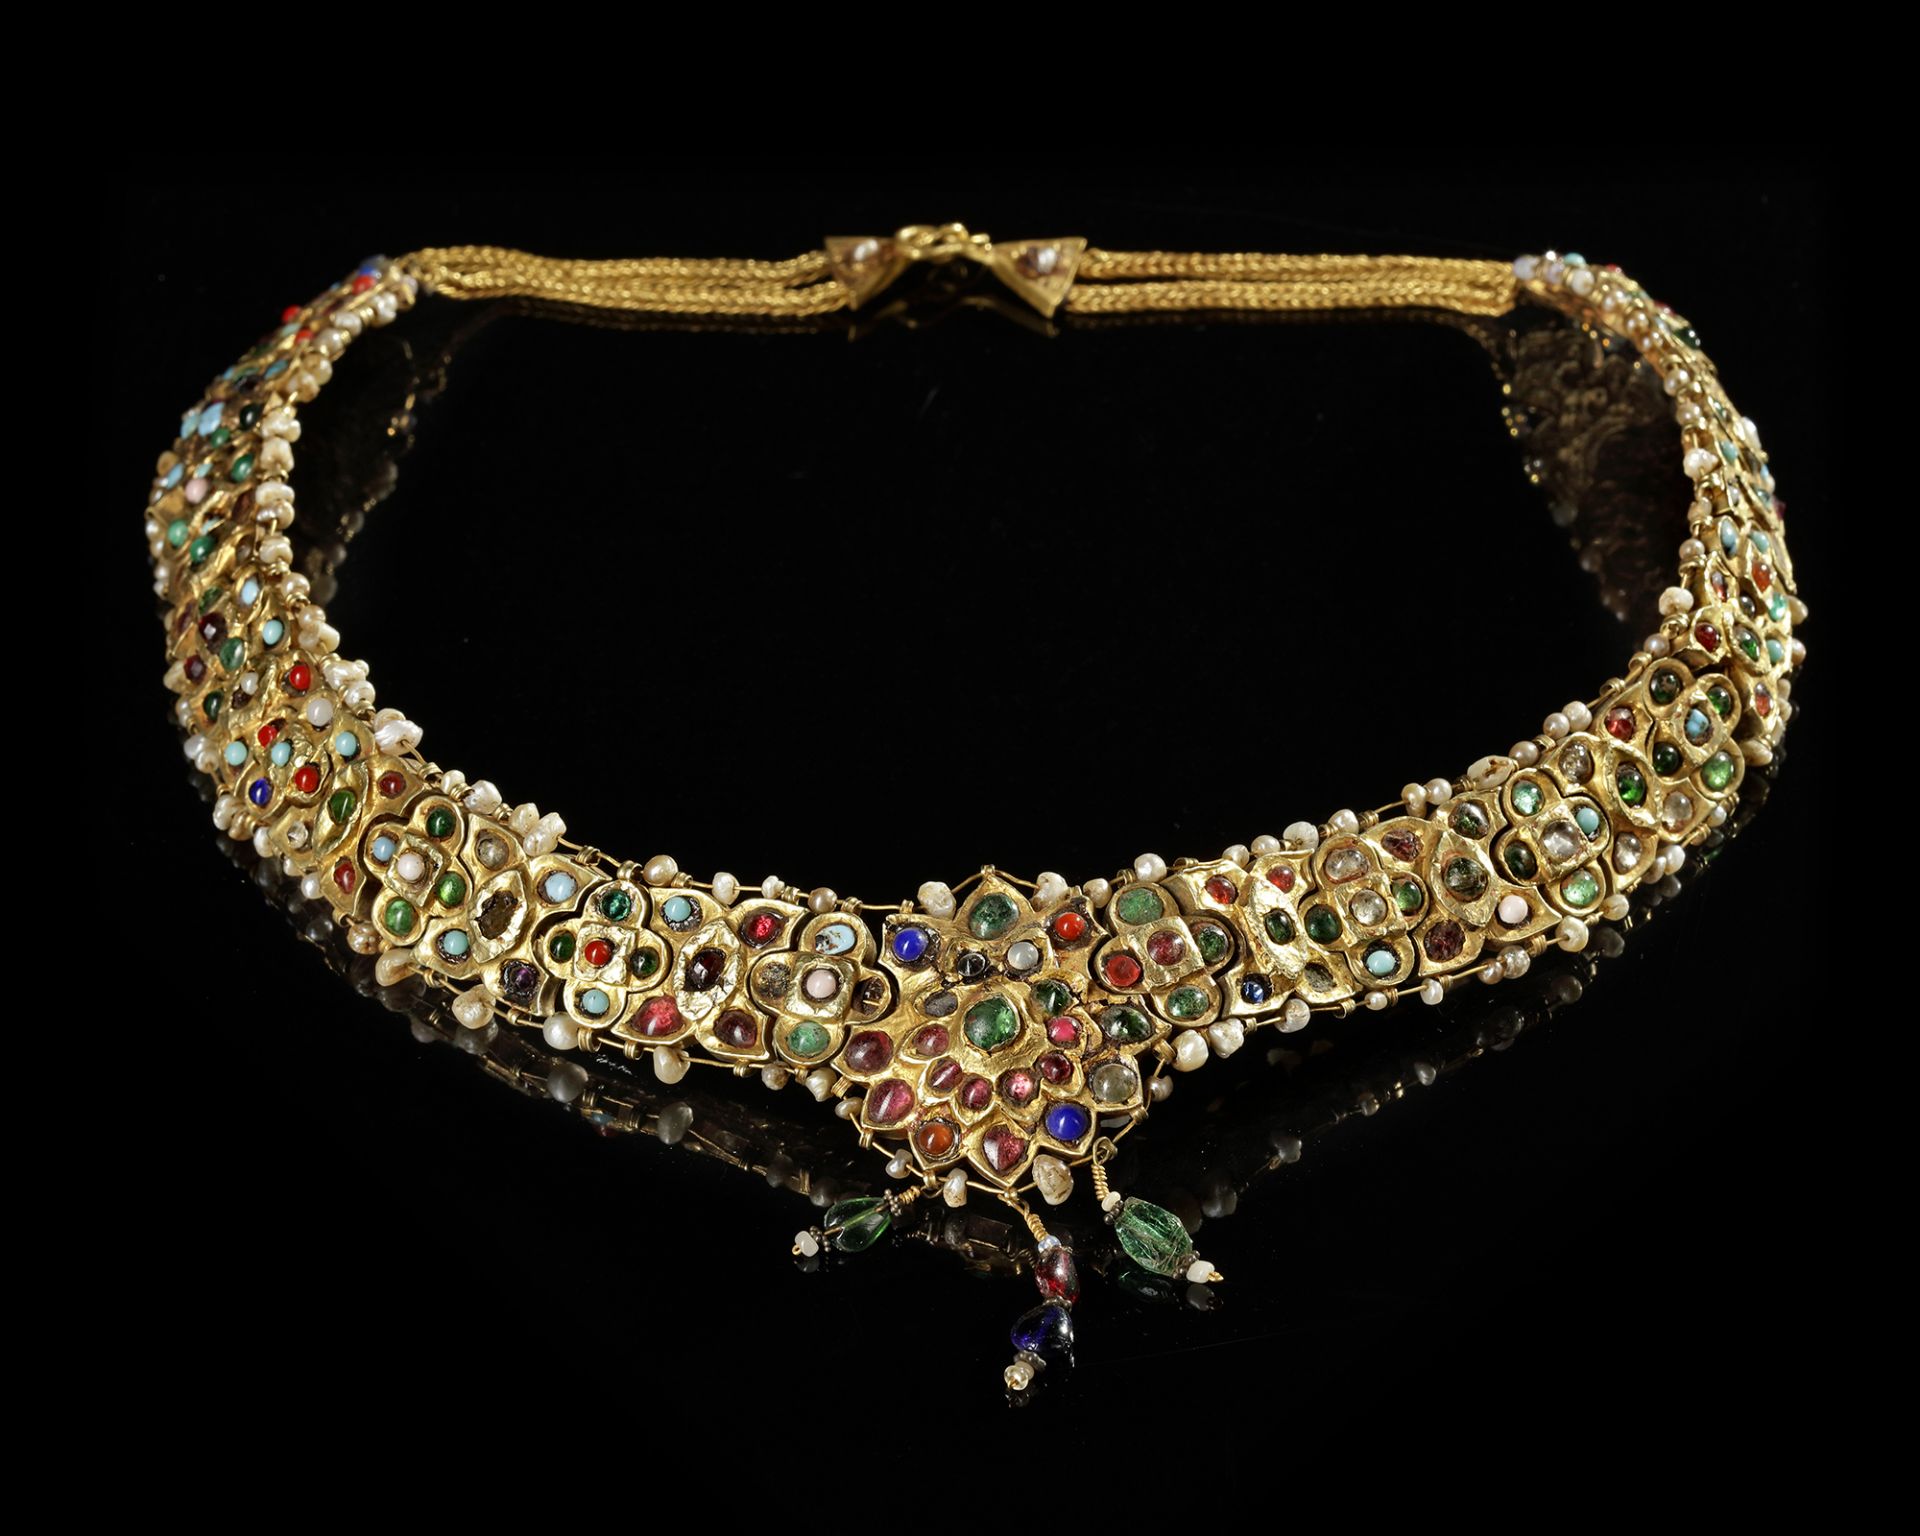 A MUGHAL GEM-SET ENAMELED GOLD NECKLACE, LATE 18TH CENTURY - Image 4 of 8